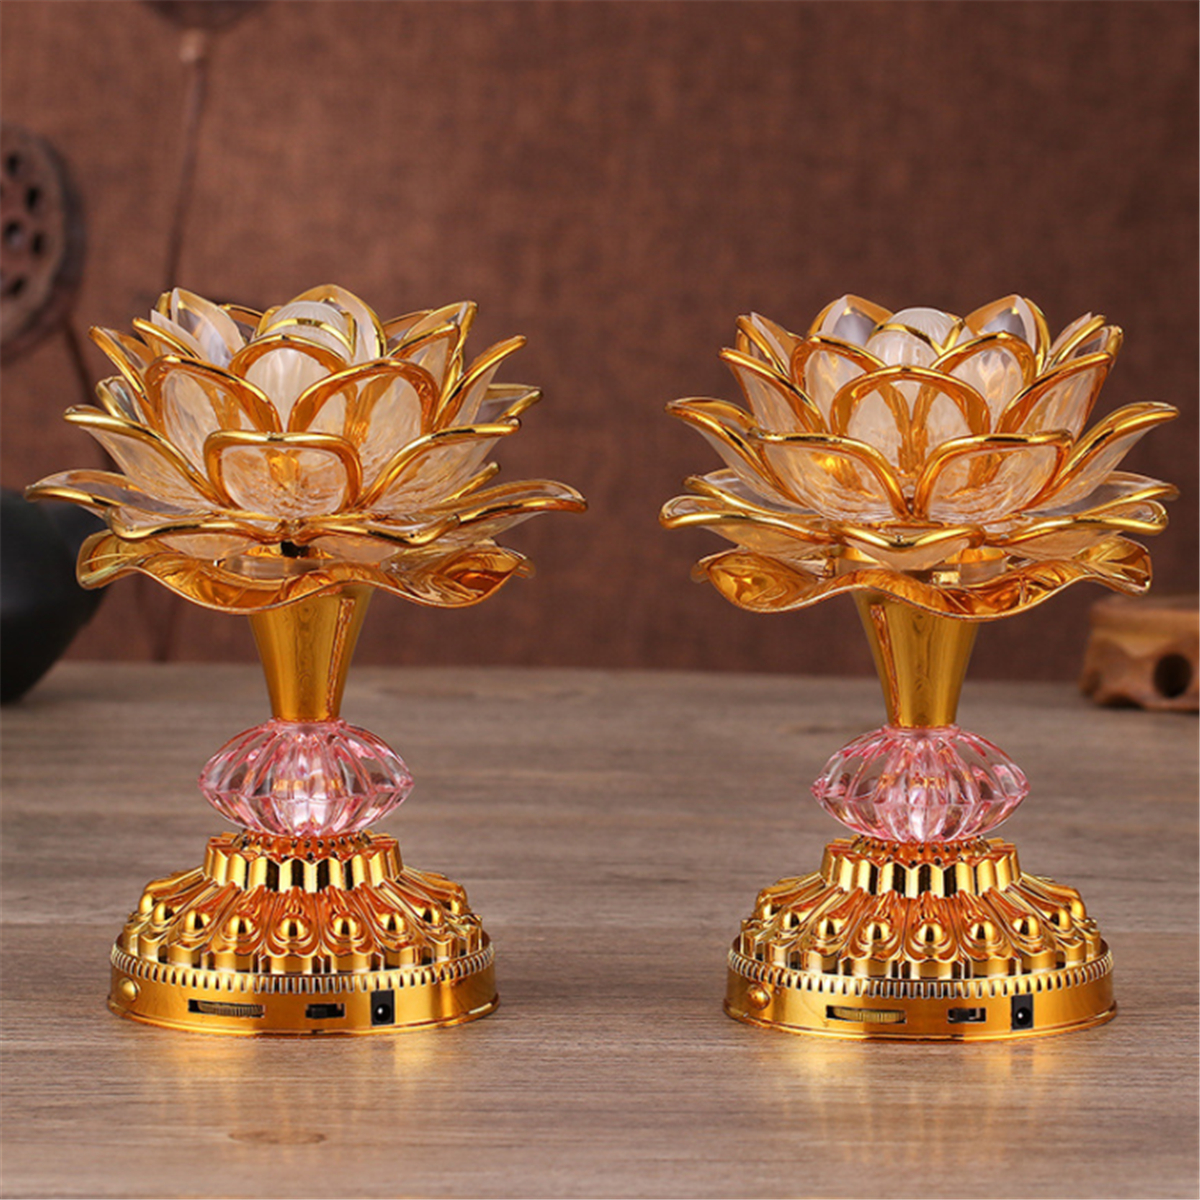 53-Buddhism-Song-7-Color-Changing-Lotus-LED-Night-Light-Music-Holiday-Lamp-Decoration-1683172-3